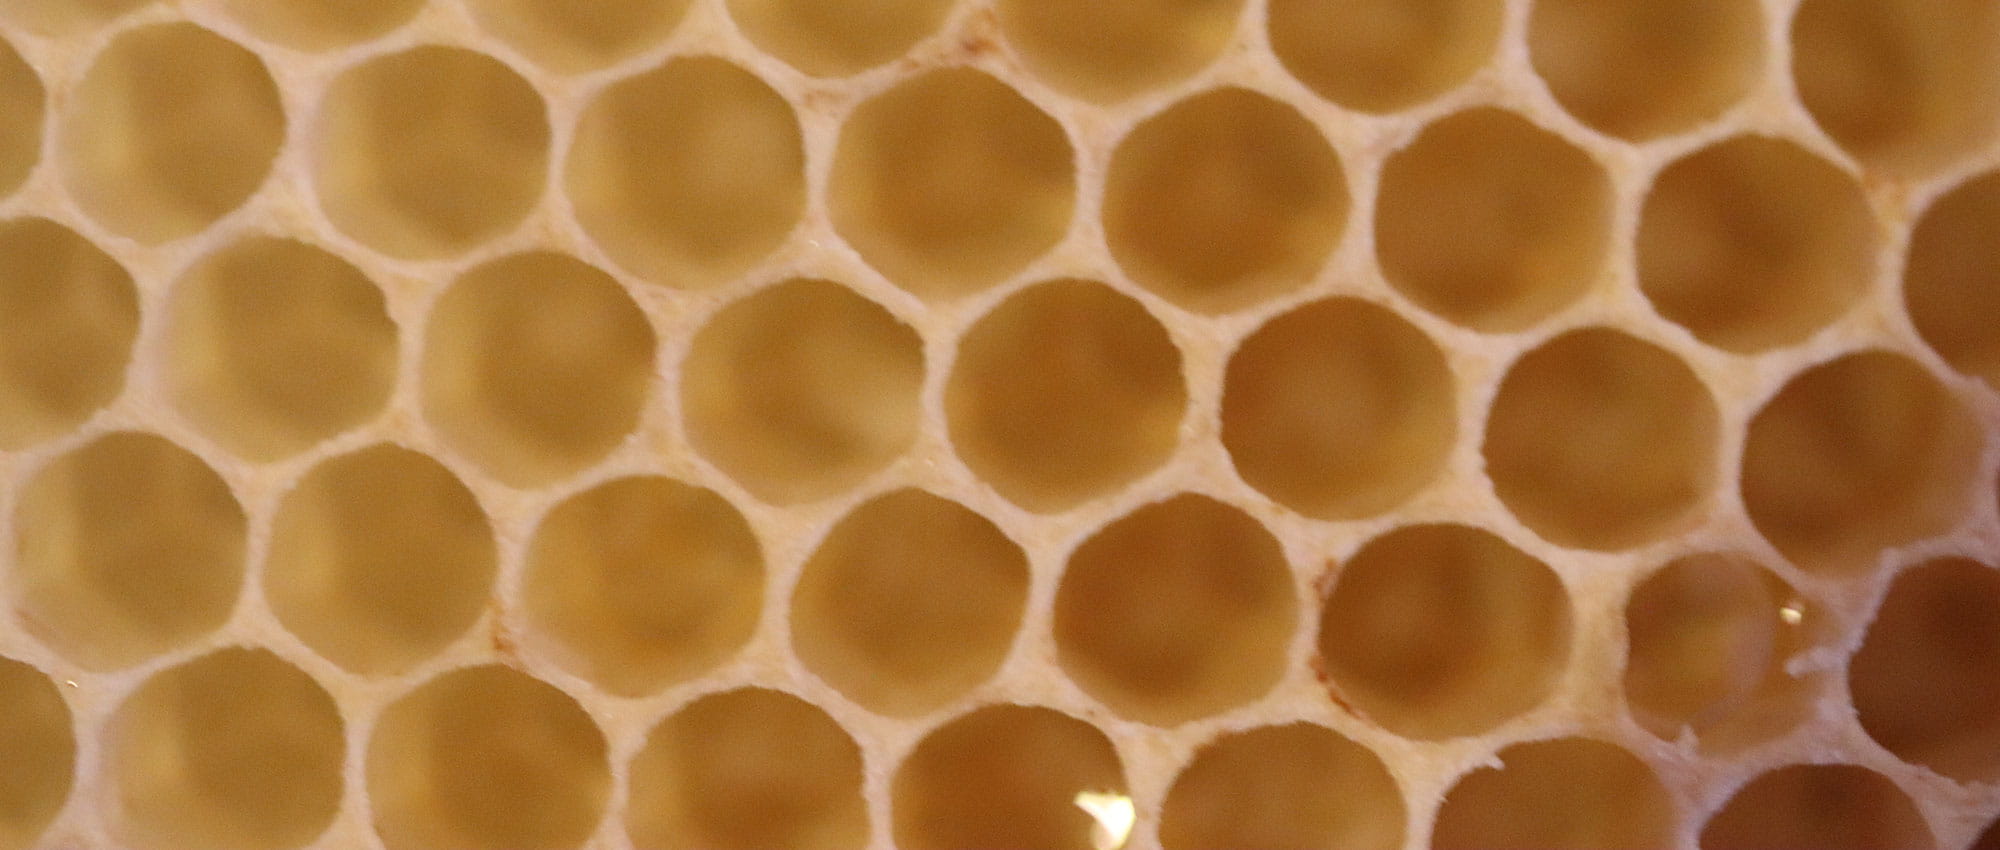 Close-up of honeycomb in different shades of orange.